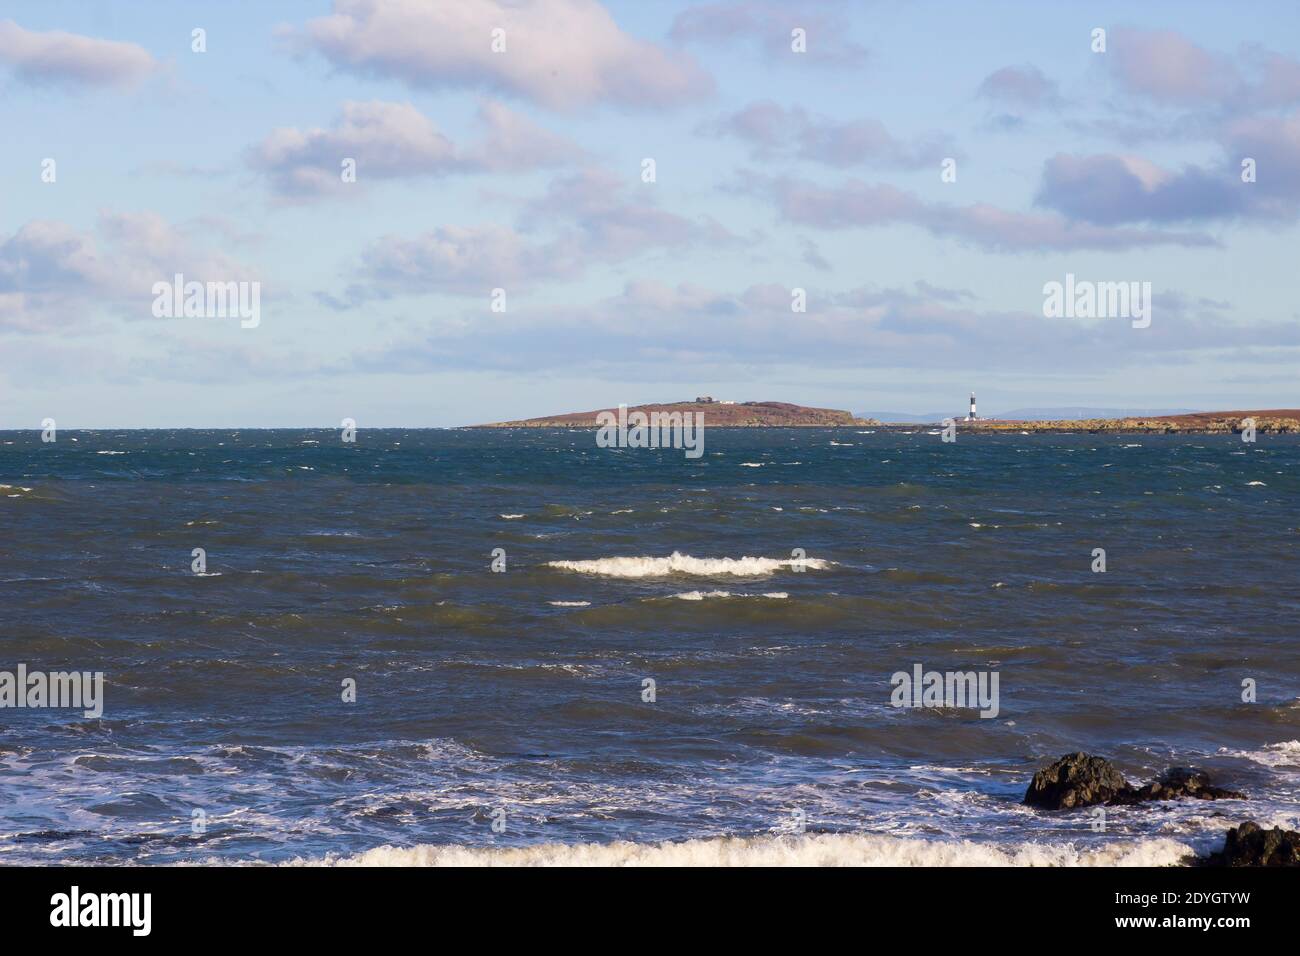 24 December 2020 A view of the rough seas across the Copeland Sound towards the Copeland Islands and Mew lighthouse on a bright winter afternoon. Stock Photo